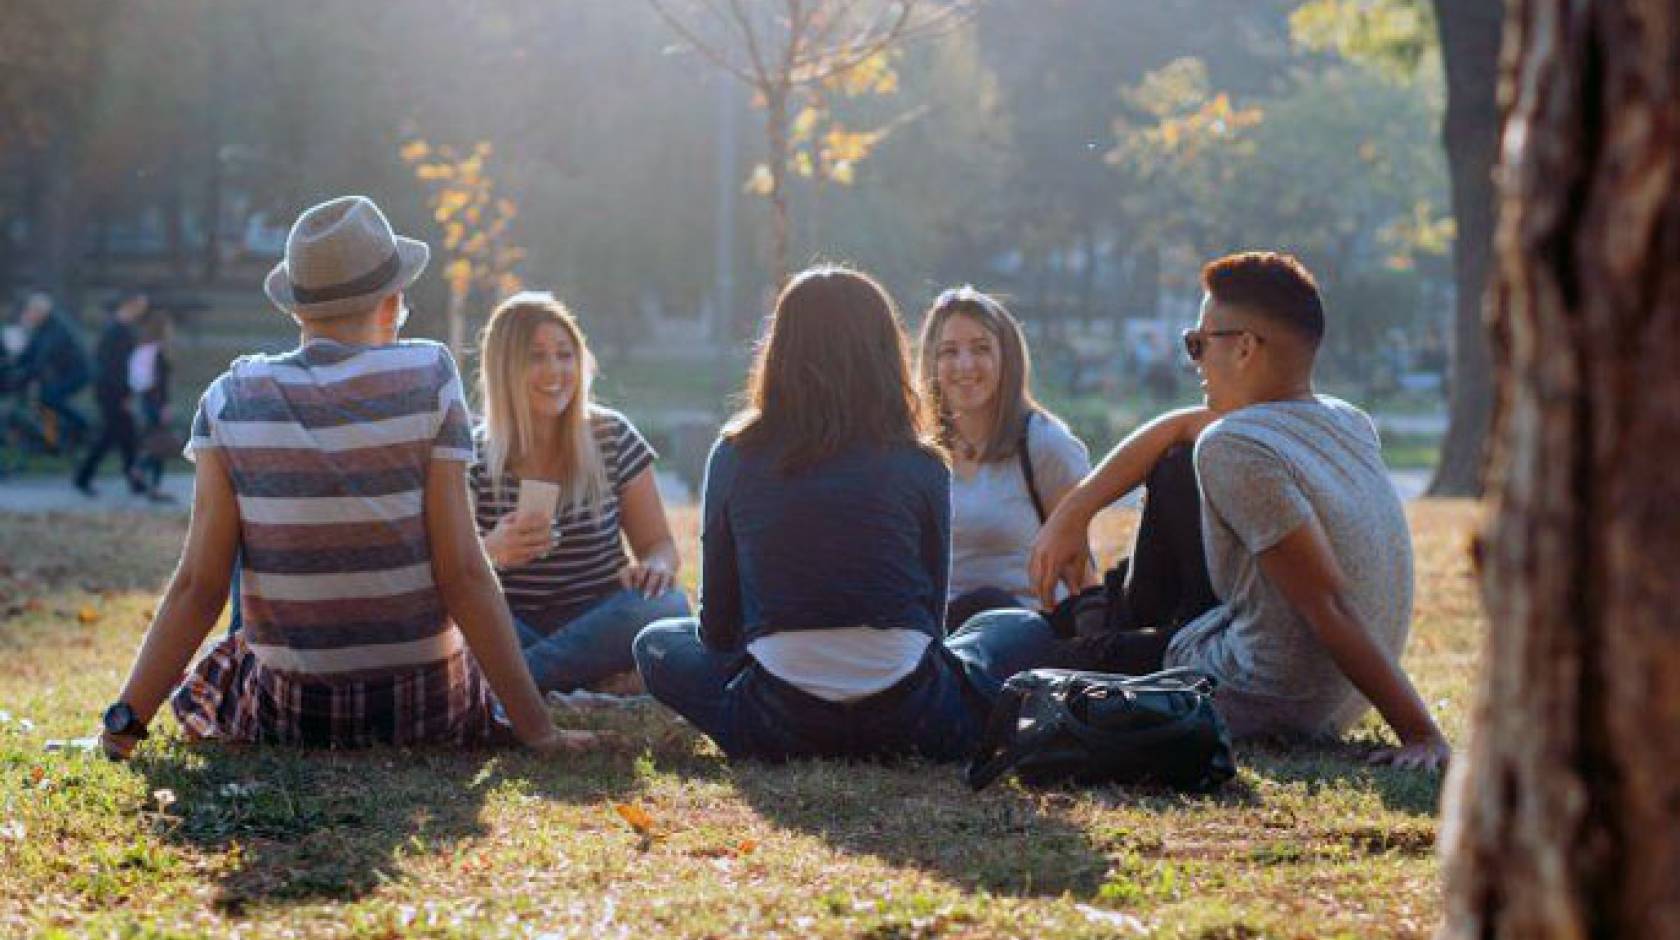 Young people picnicking